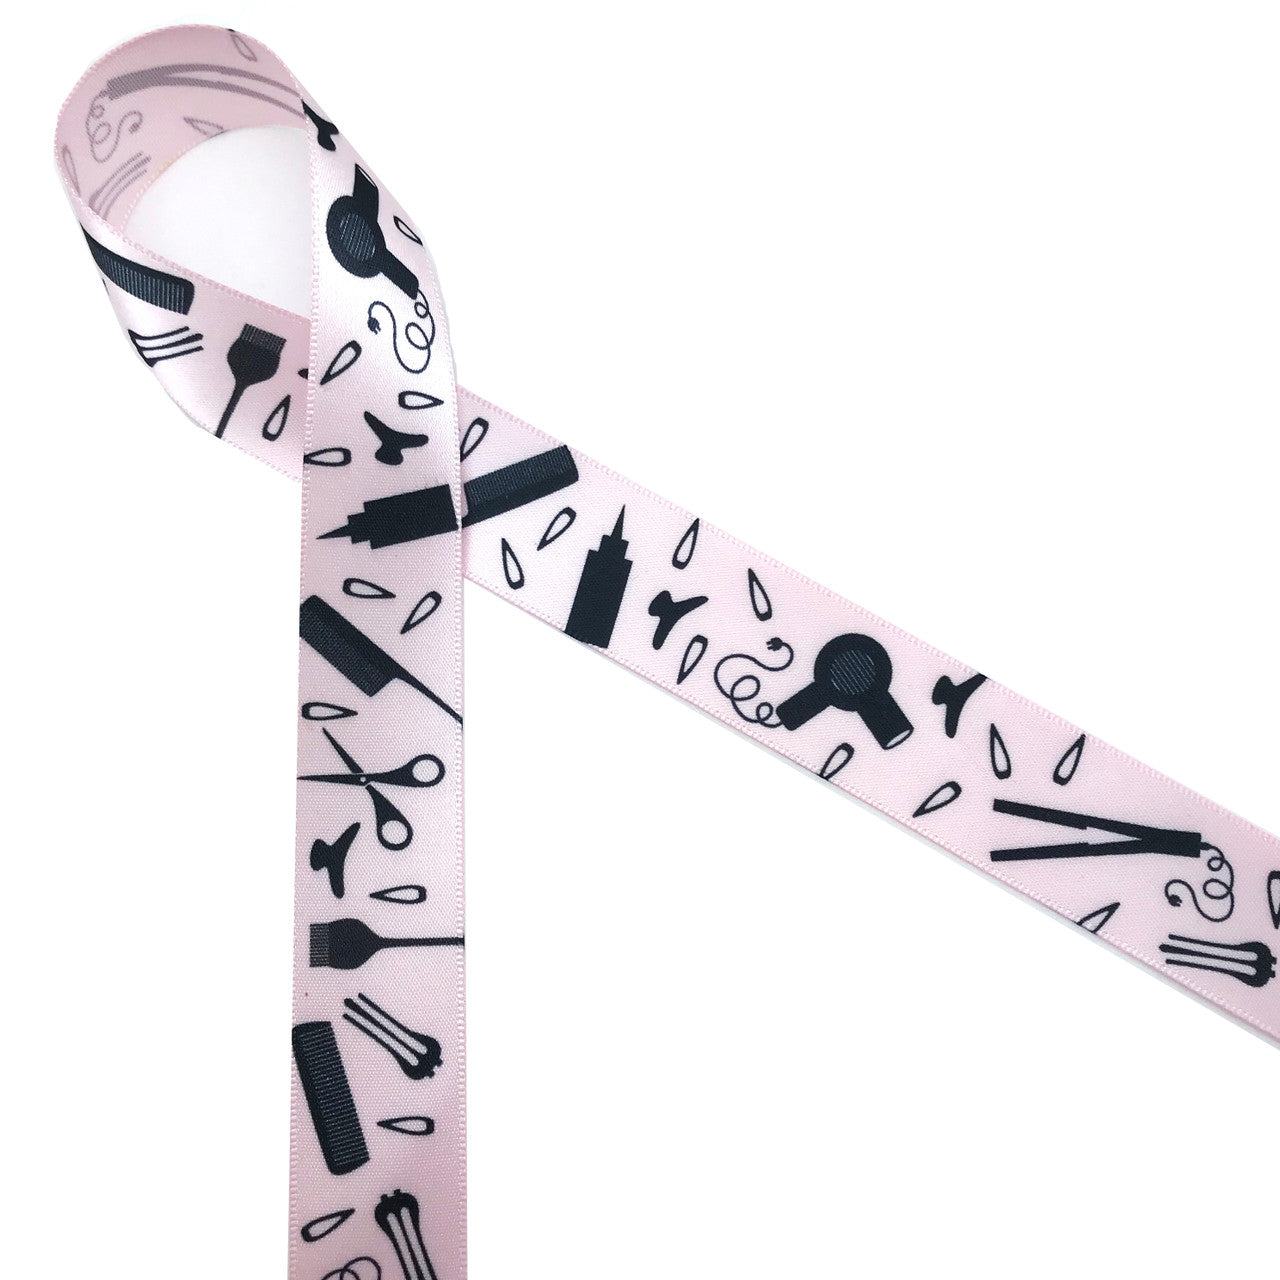 Hair dressing themed ribbon printed on 7/8" pink single face satin will make your favorite hair dresser so happy when tied on a gift for a special occasion or holiday!